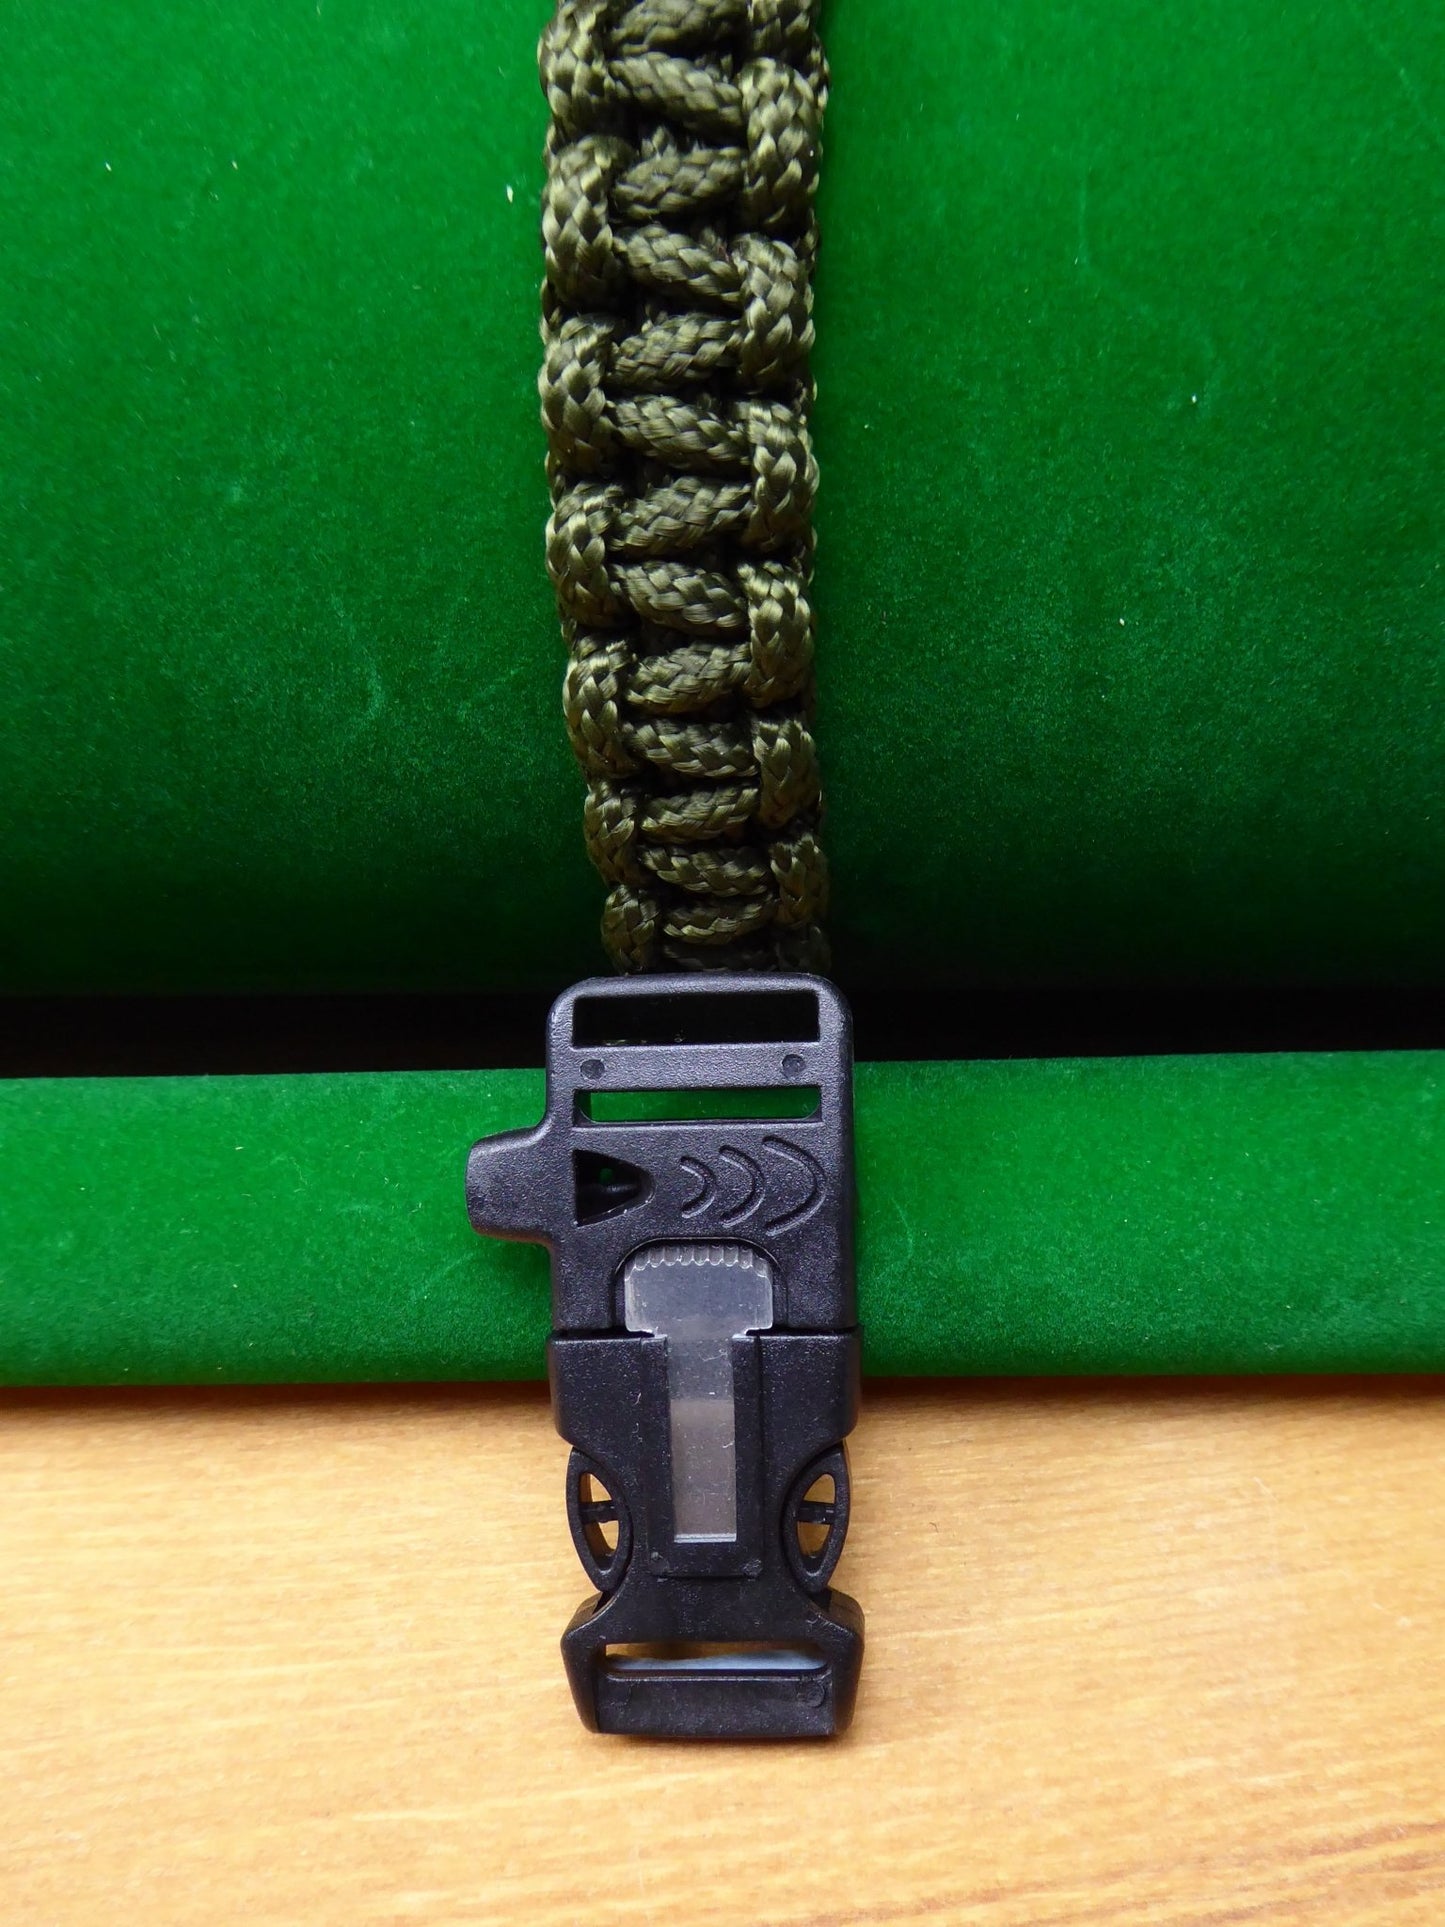 Paracord Buckle Bracelet kits with choice of colours Paracord Huggins Attic Army Camo Black Plastic firesteel scraper & whistle Buckle  [Huggins attic]